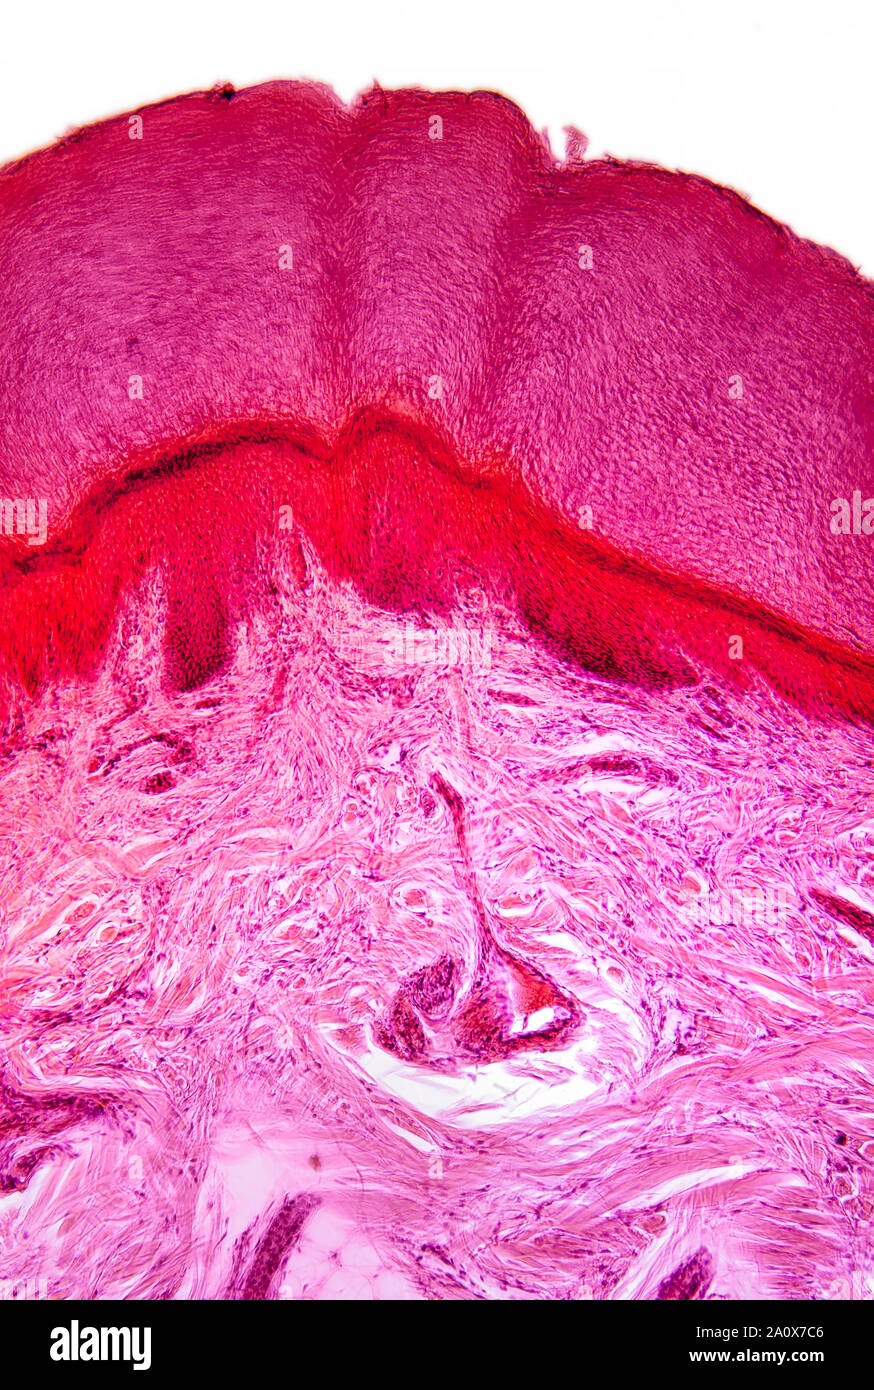 Frog, Rana sp. skin section & gland detail, stained section, brightfield photomicrograph Stock Photo